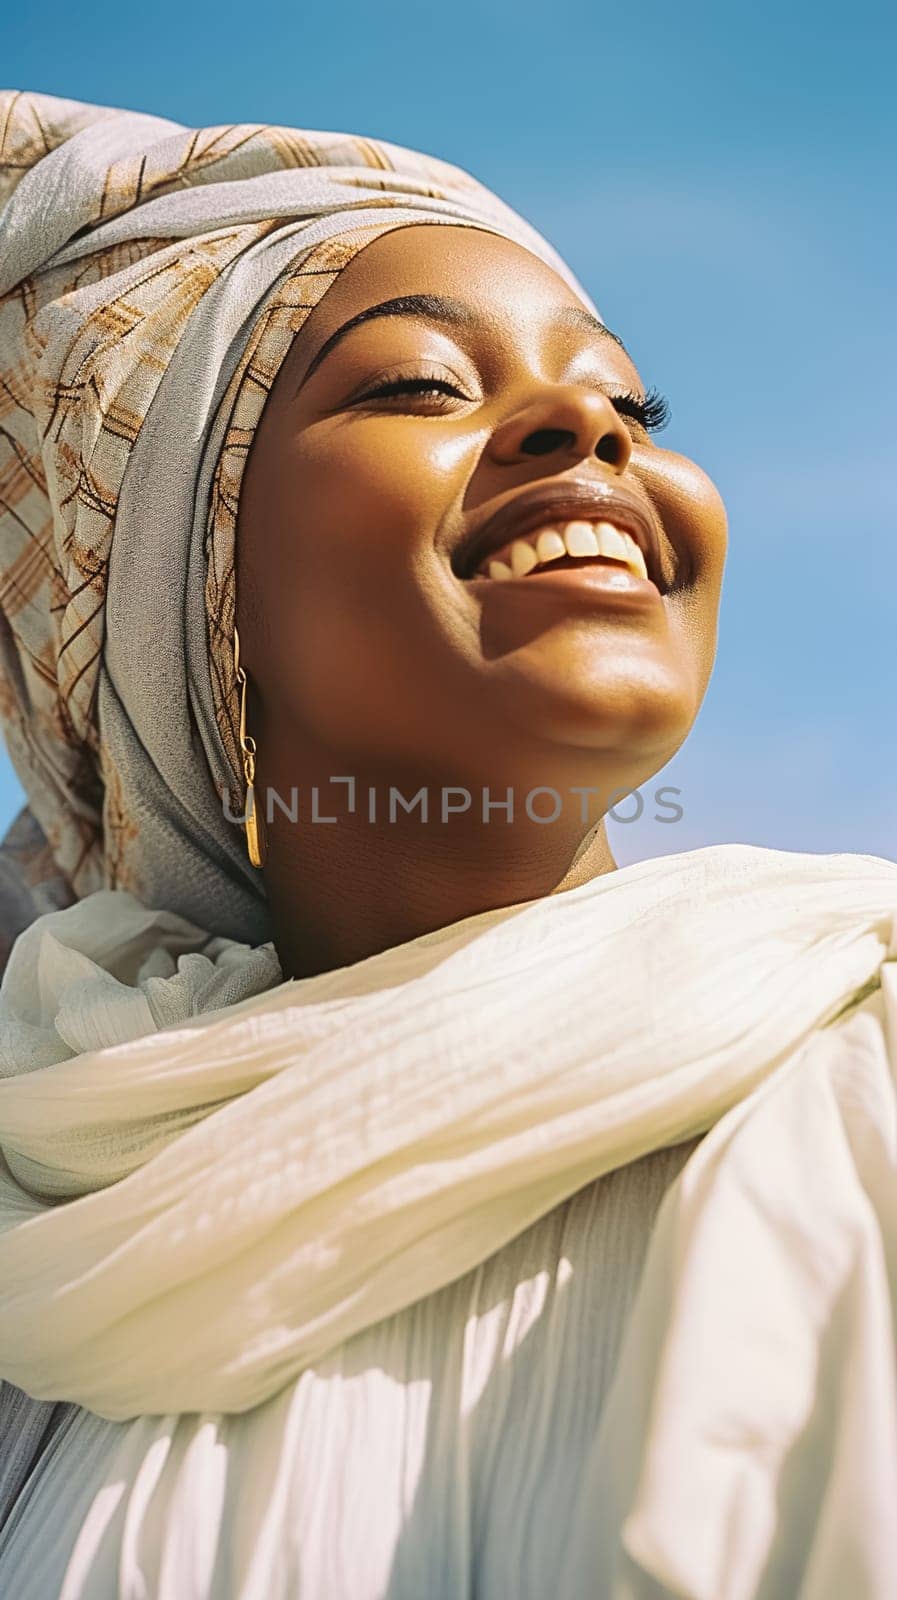 A full, cheerful African-American woman with a turban on her head, wearing white clothing. by Yurich32